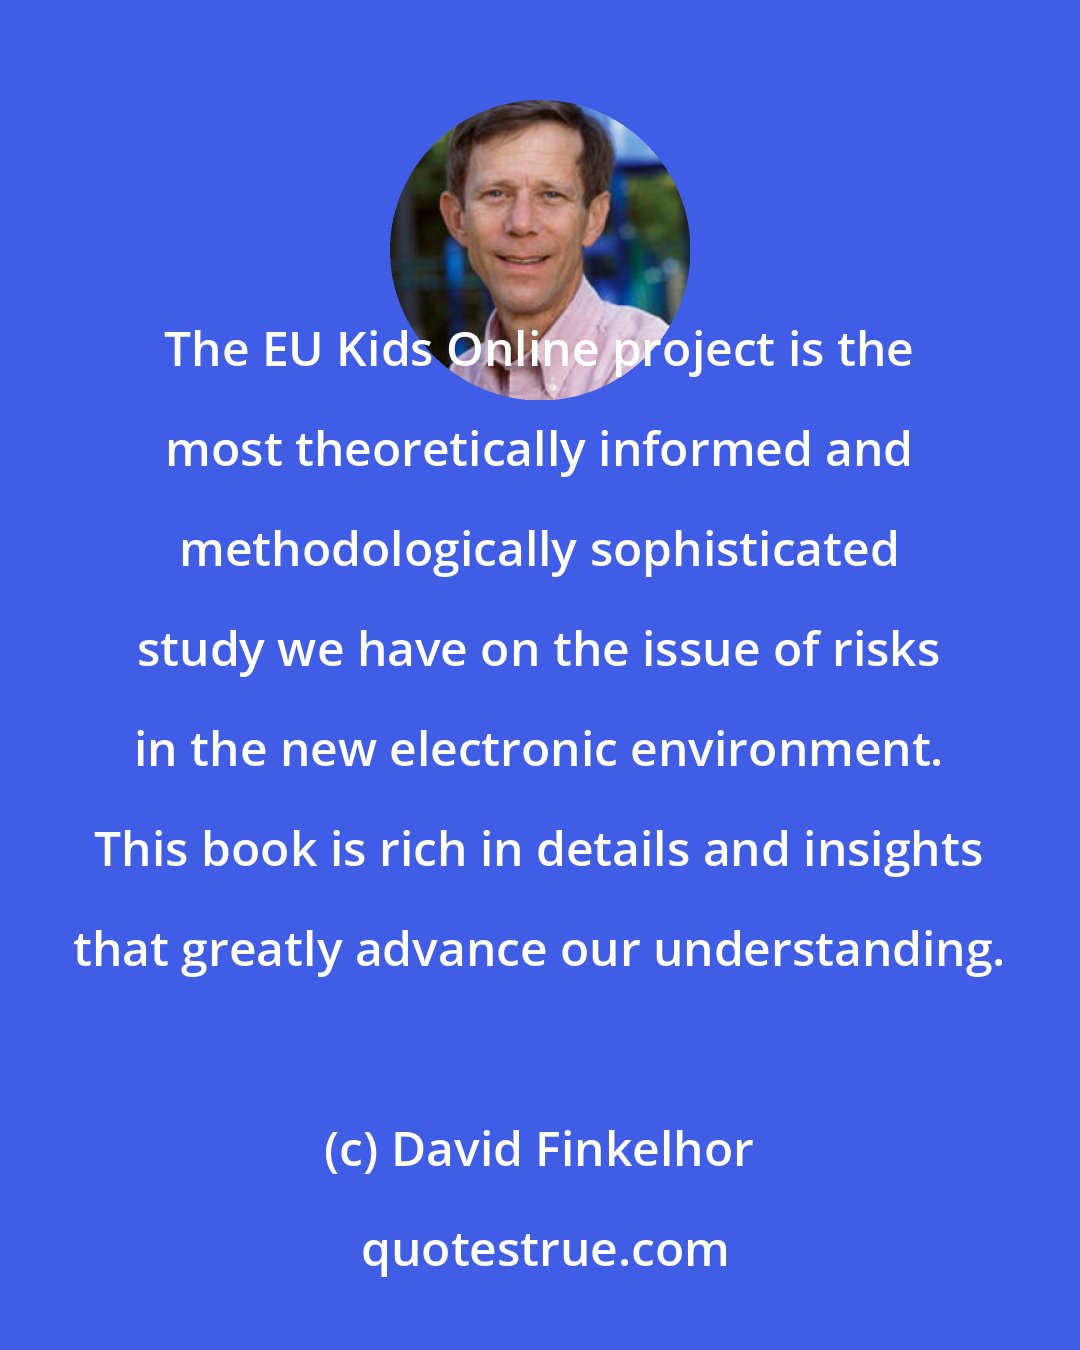 David Finkelhor: The EU Kids Online project is the most theoretically informed and methodologically sophisticated study we have on the issue of risks in the new electronic environment. This book is rich in details and insights that greatly advance our understanding.